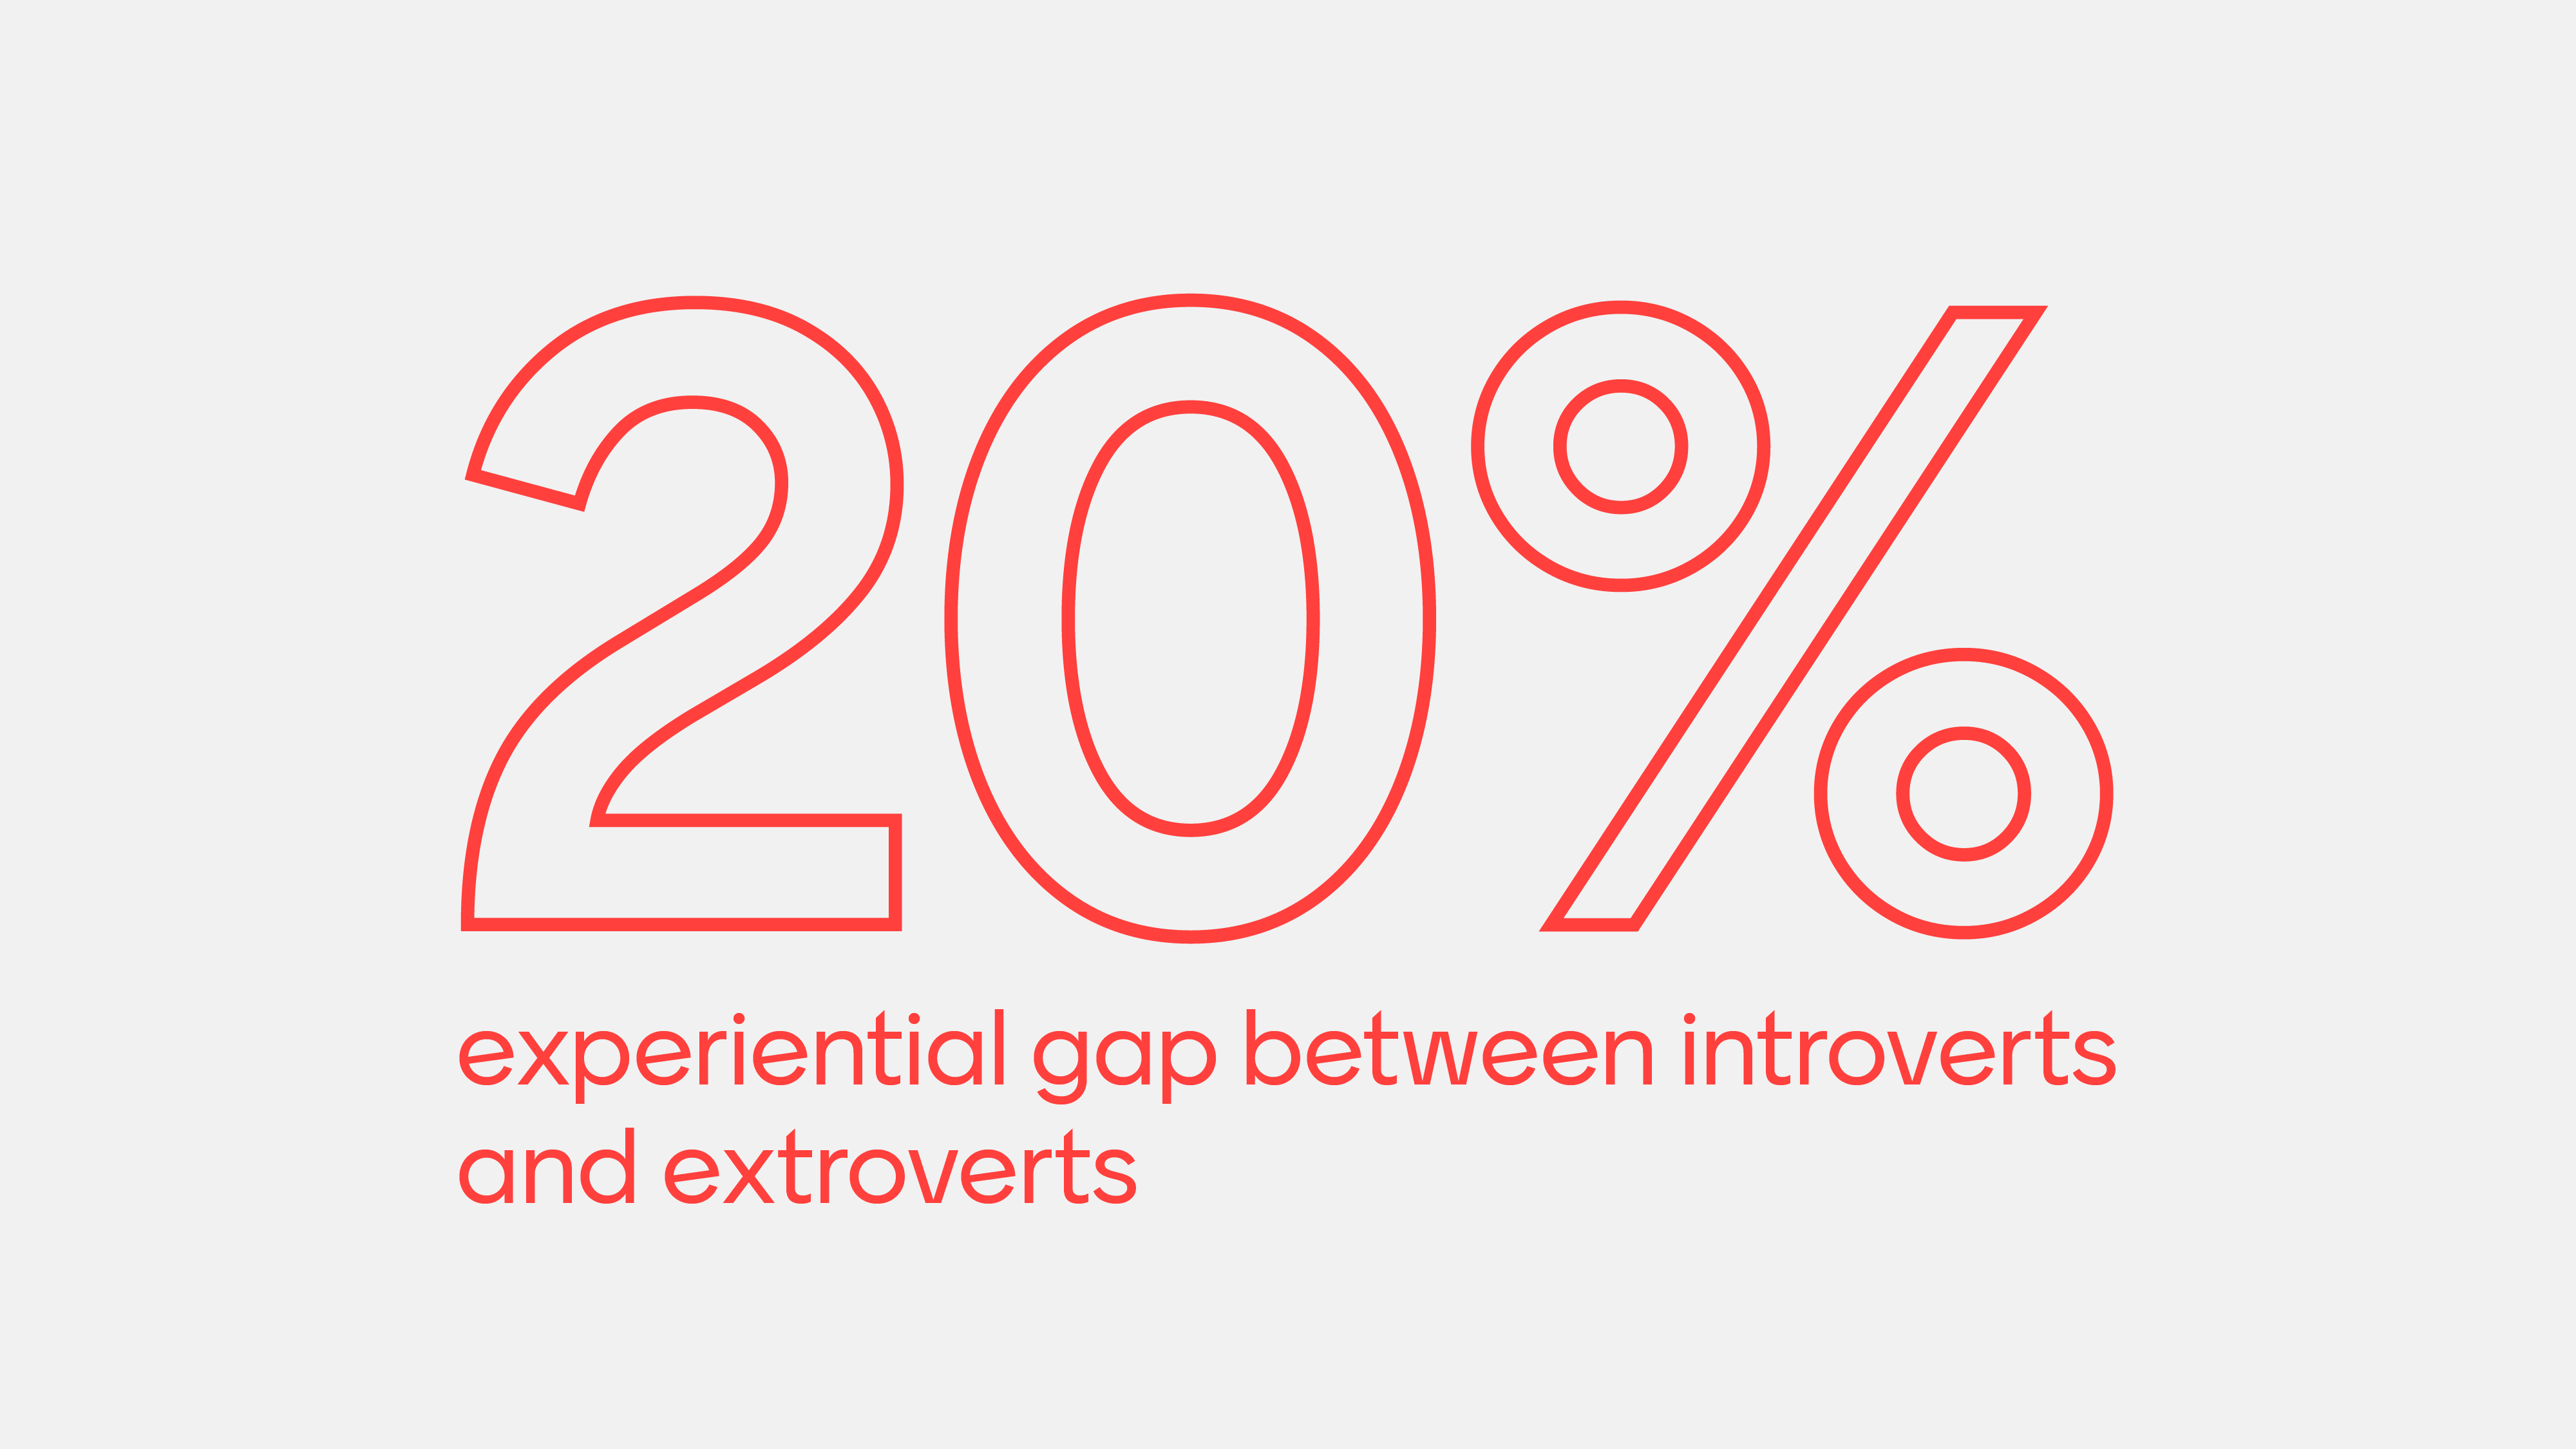 20% experiential gap between introverts and extroverts